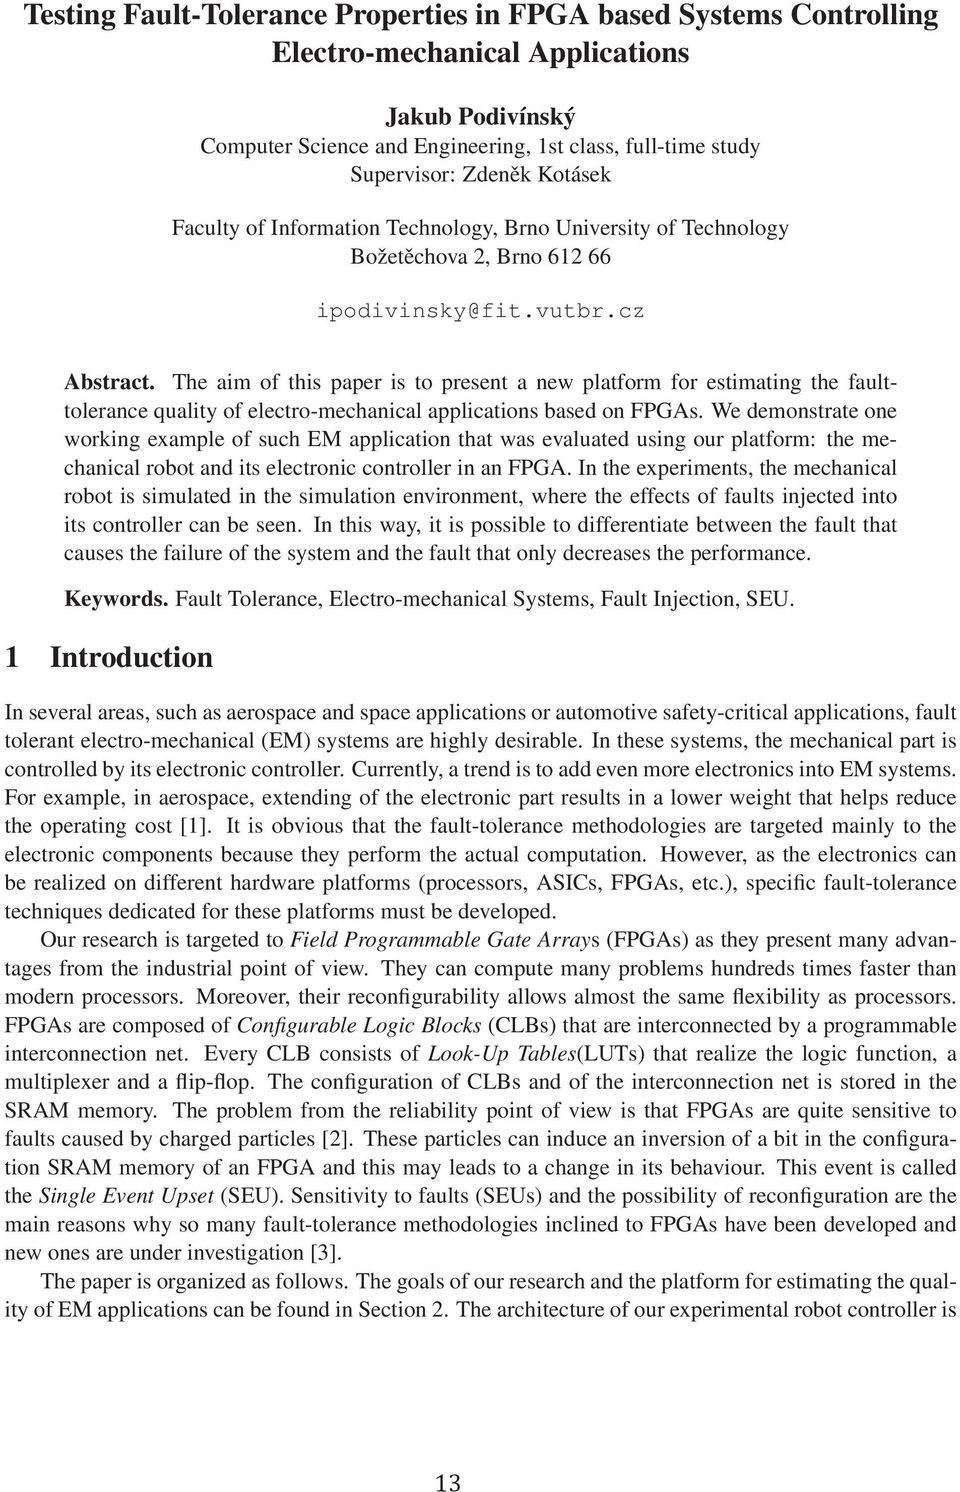 The aim of this paper is to present a new platform for estimating the faulttolerance quality of electro-mechanical applications based on FPGAs.